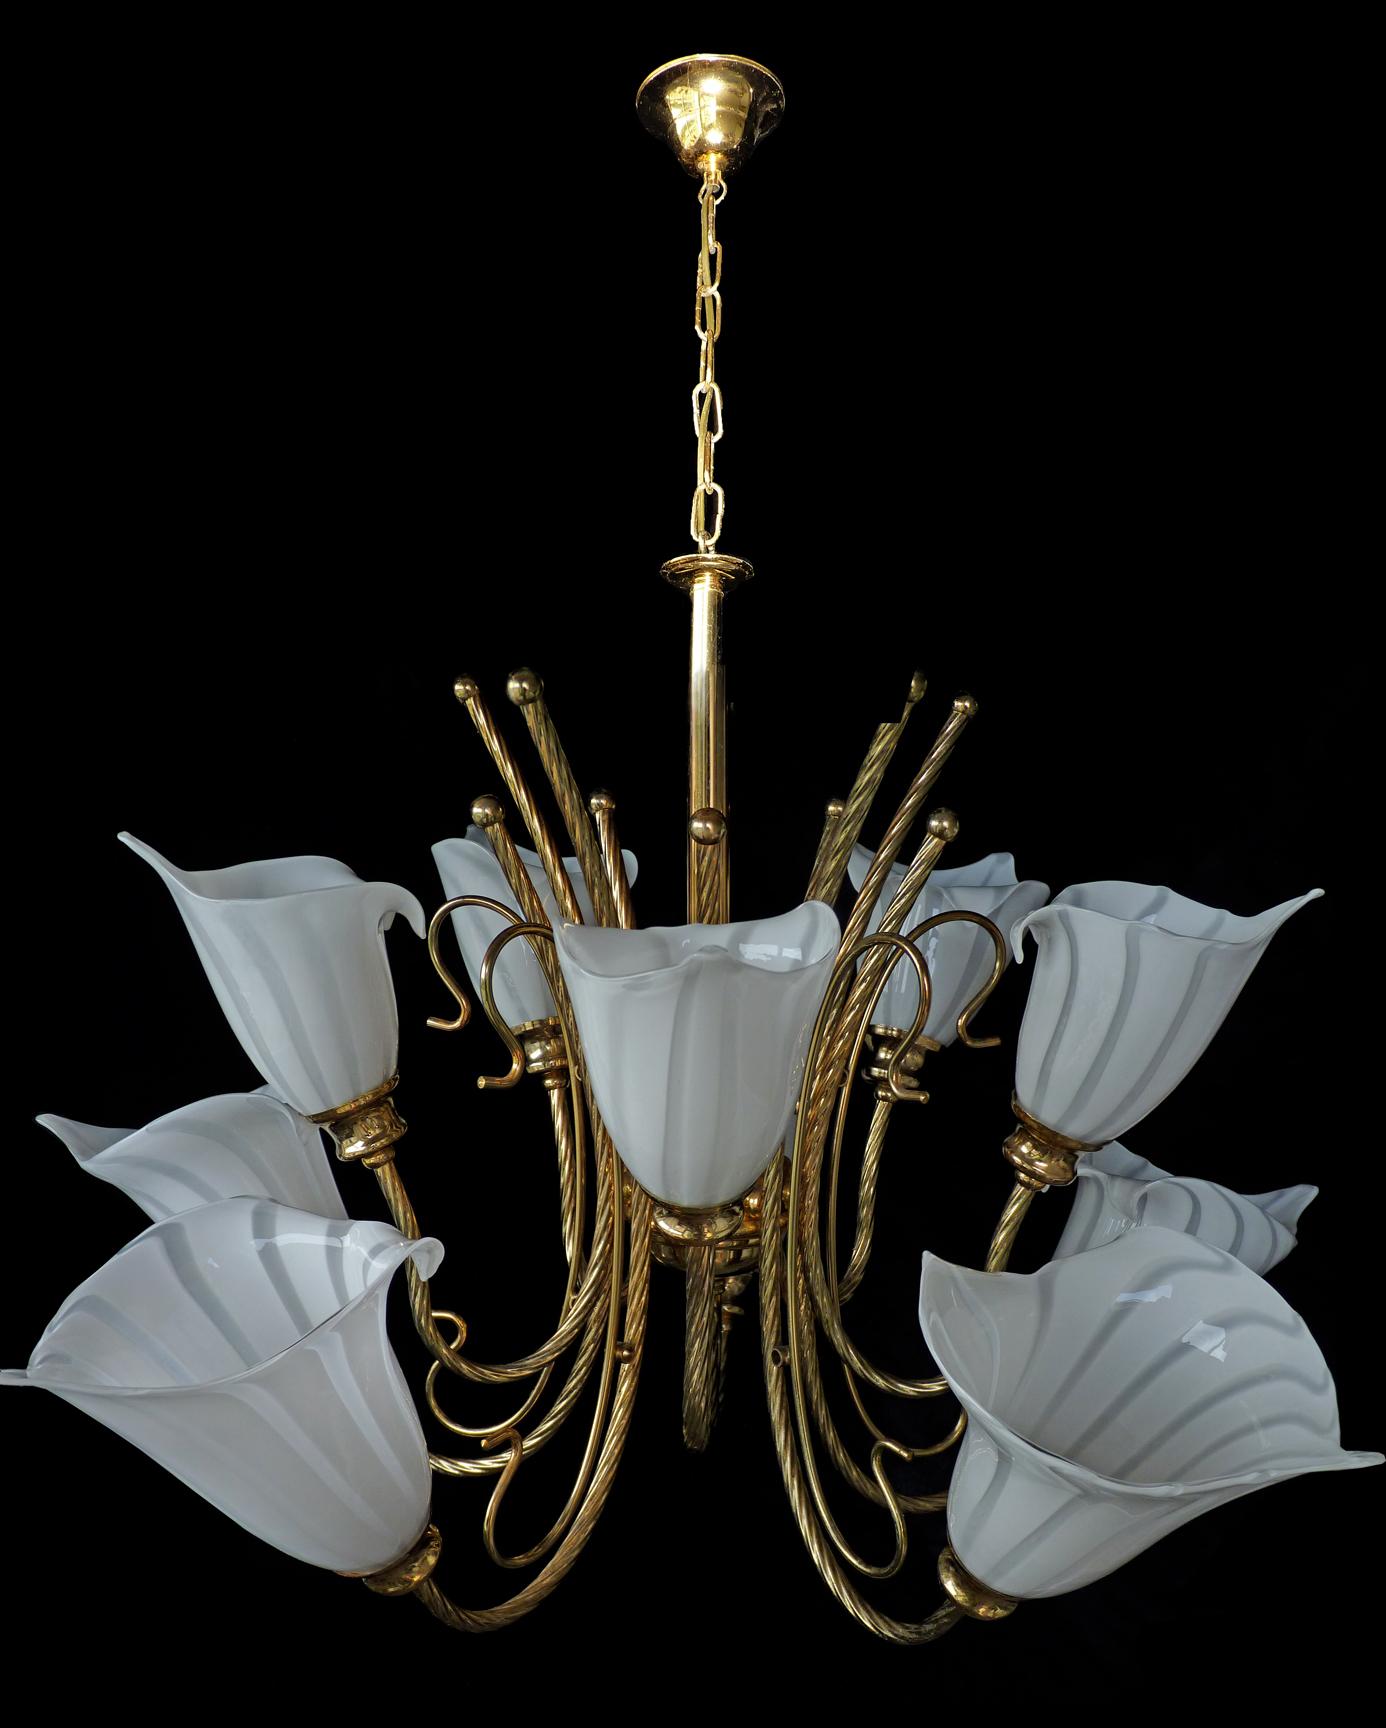 Large 10-Light Murano Calla Lily Chandelier by Franco Luce, Art Glass Gilt Brass 1